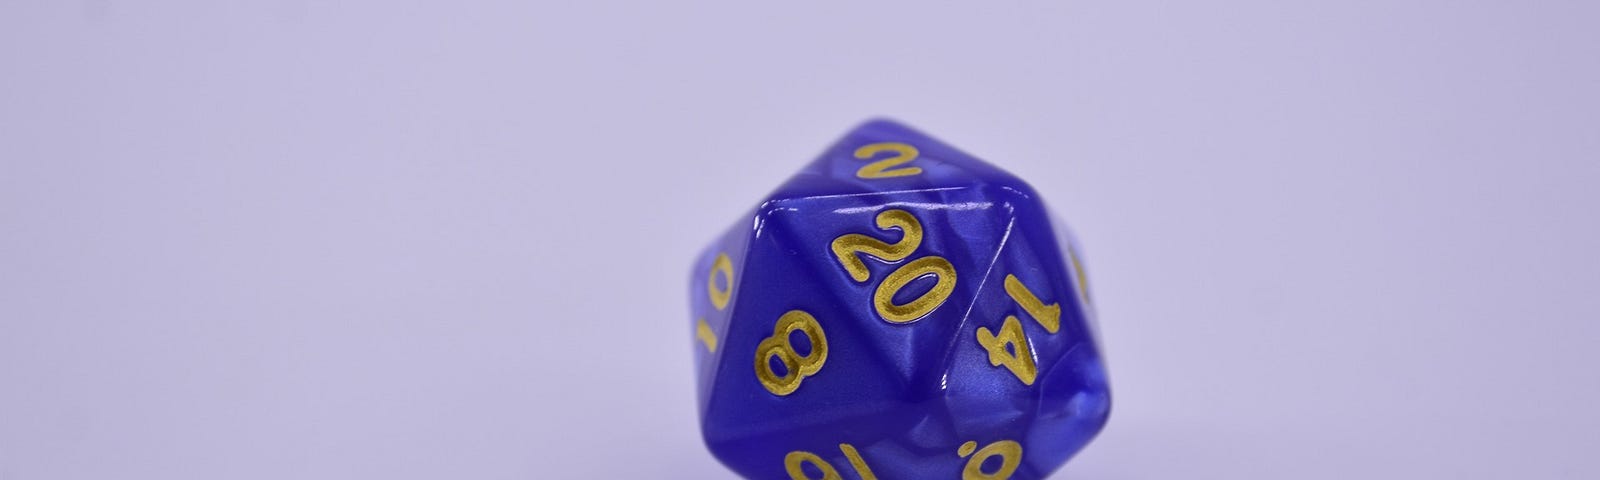 A picture of a twenty-sided dice, coloured in shades of blue and golden numbers.